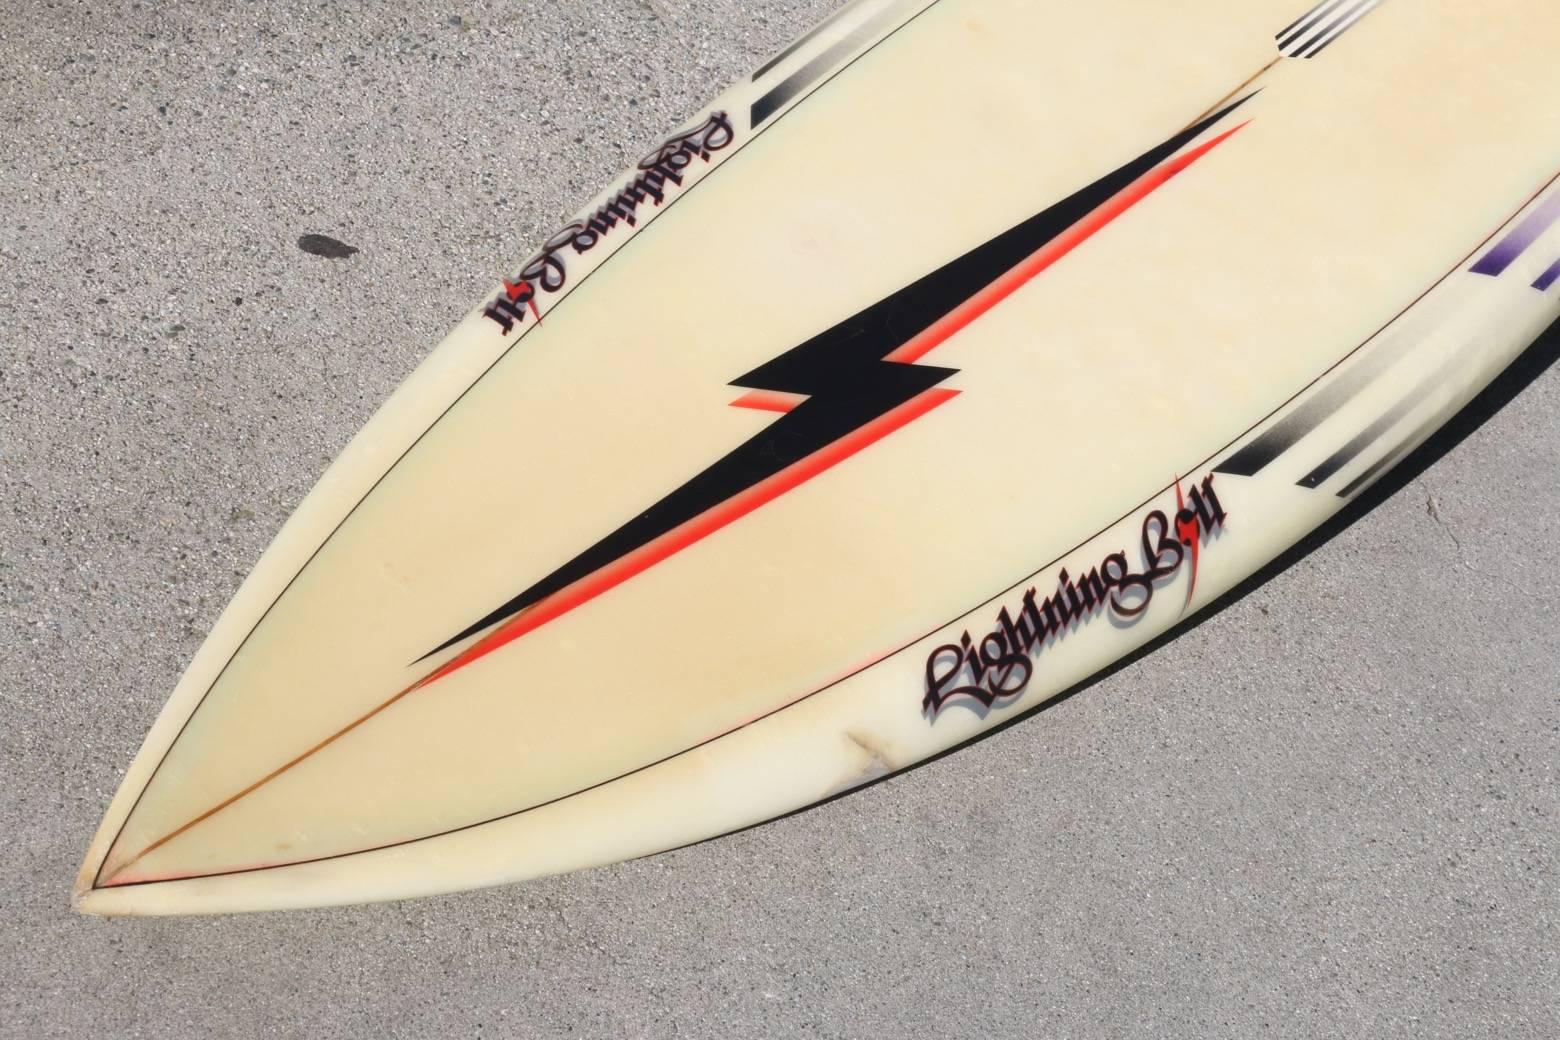 Mid-Century Modern Lightning Bolt Surfboard with Black and Red Bolt, 1980s